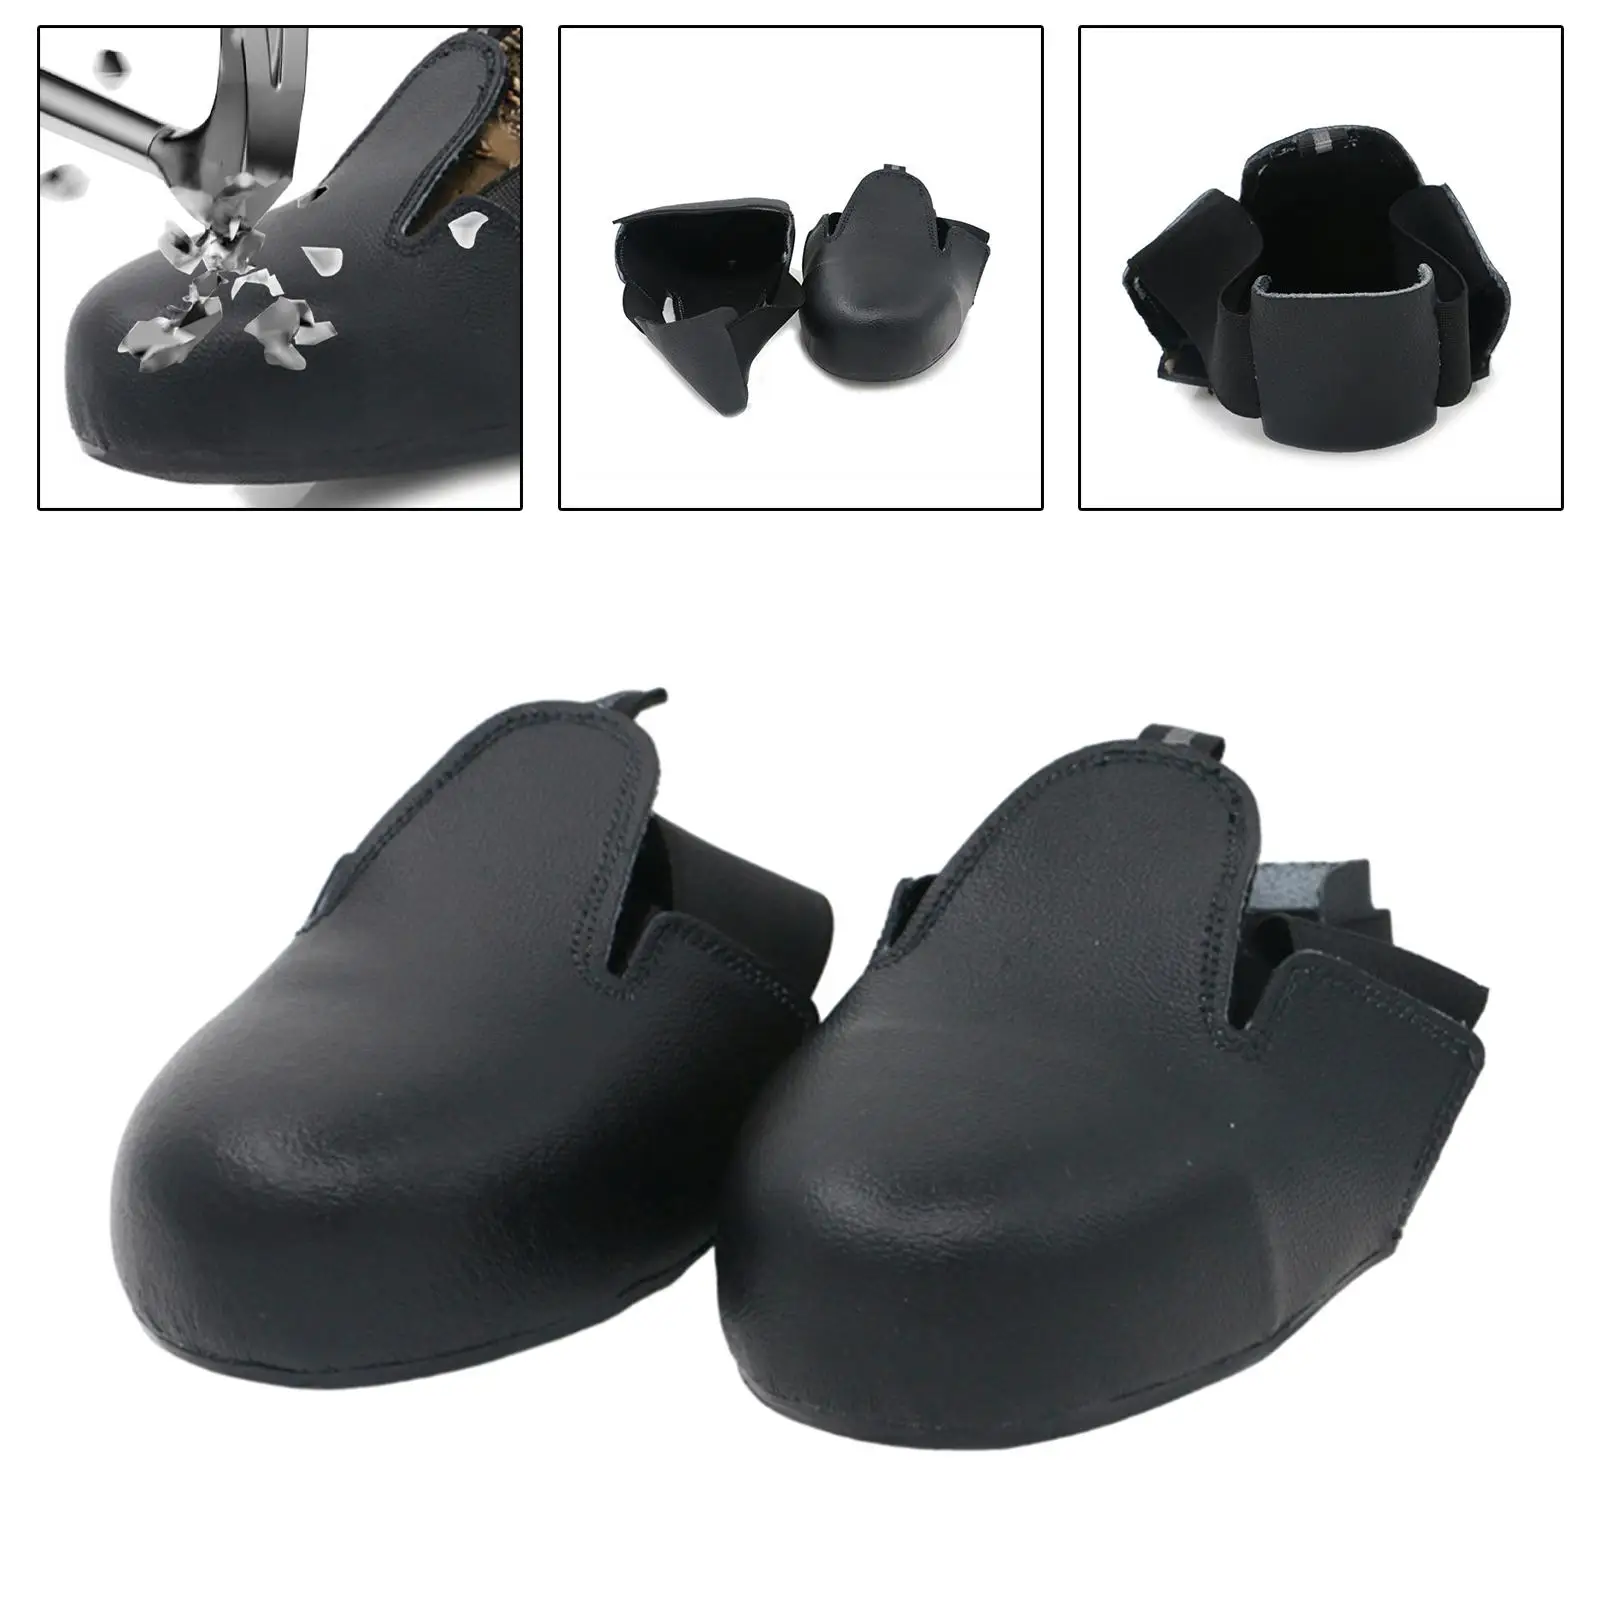 Toe Cap Safety Overshoes Universal Anti Smashing Guards Covers for Industry and Workplace Protection PU Leather Overshoes Cover